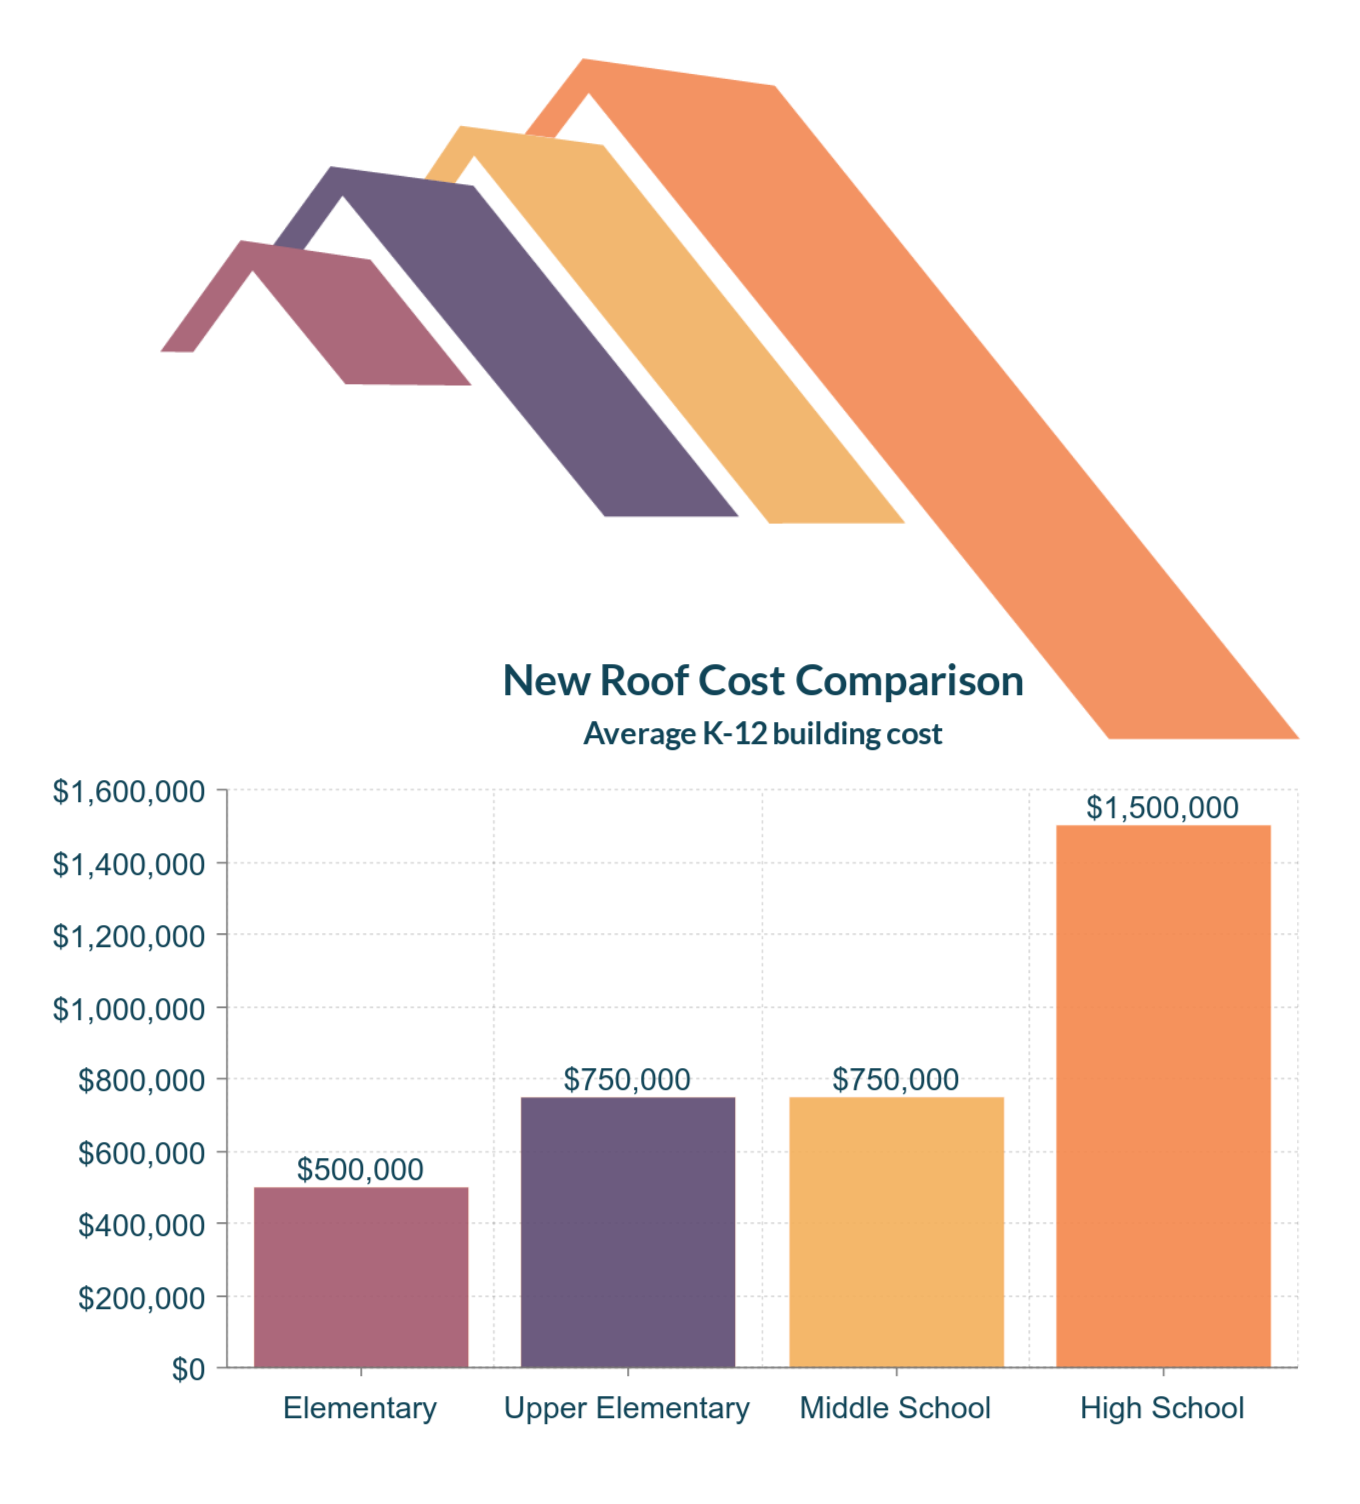 Average K-12 Roofing Cost